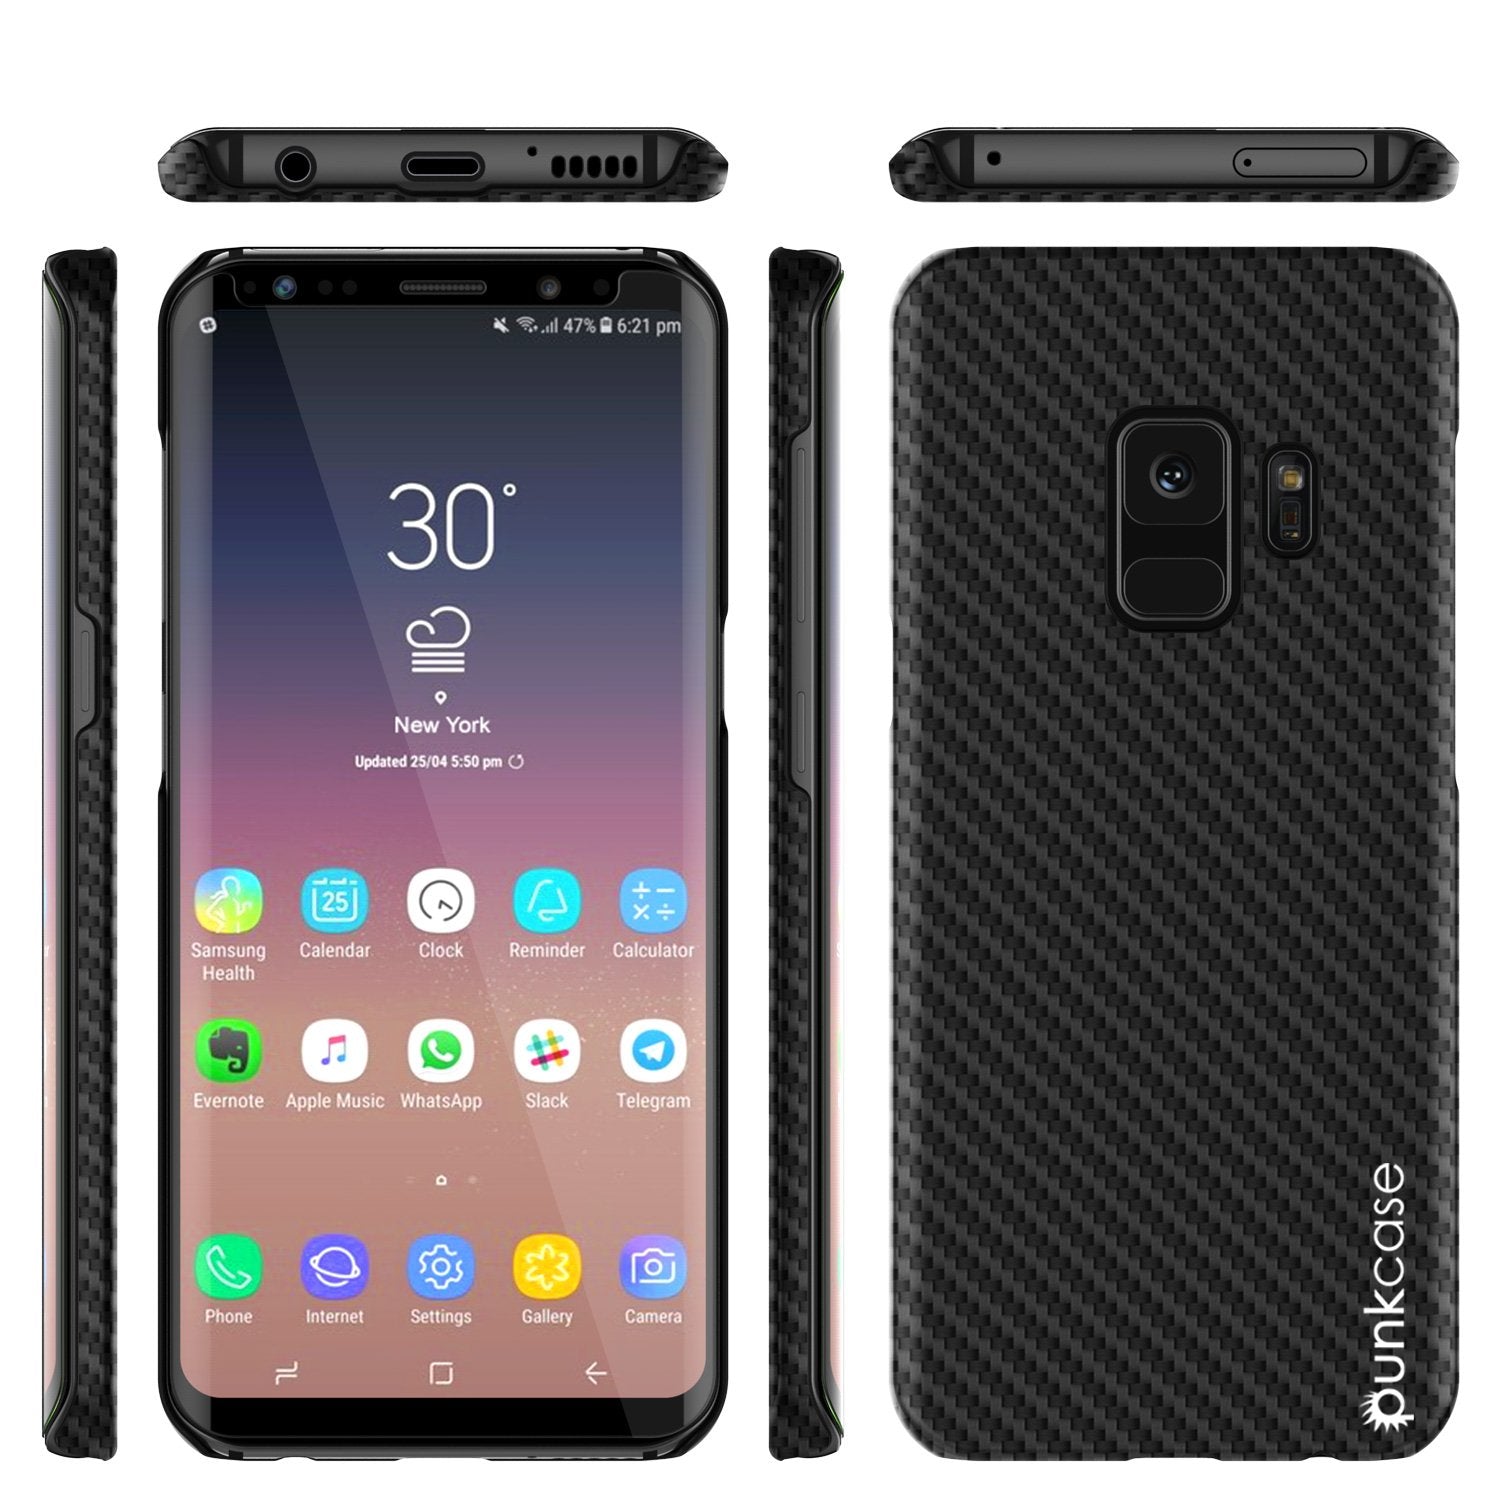 Galaxy S9 Case, Punkcase CarbonShield, Heavy Duty & Ultra Thin 2 Piece Dual Layer PU Leather Black Cover